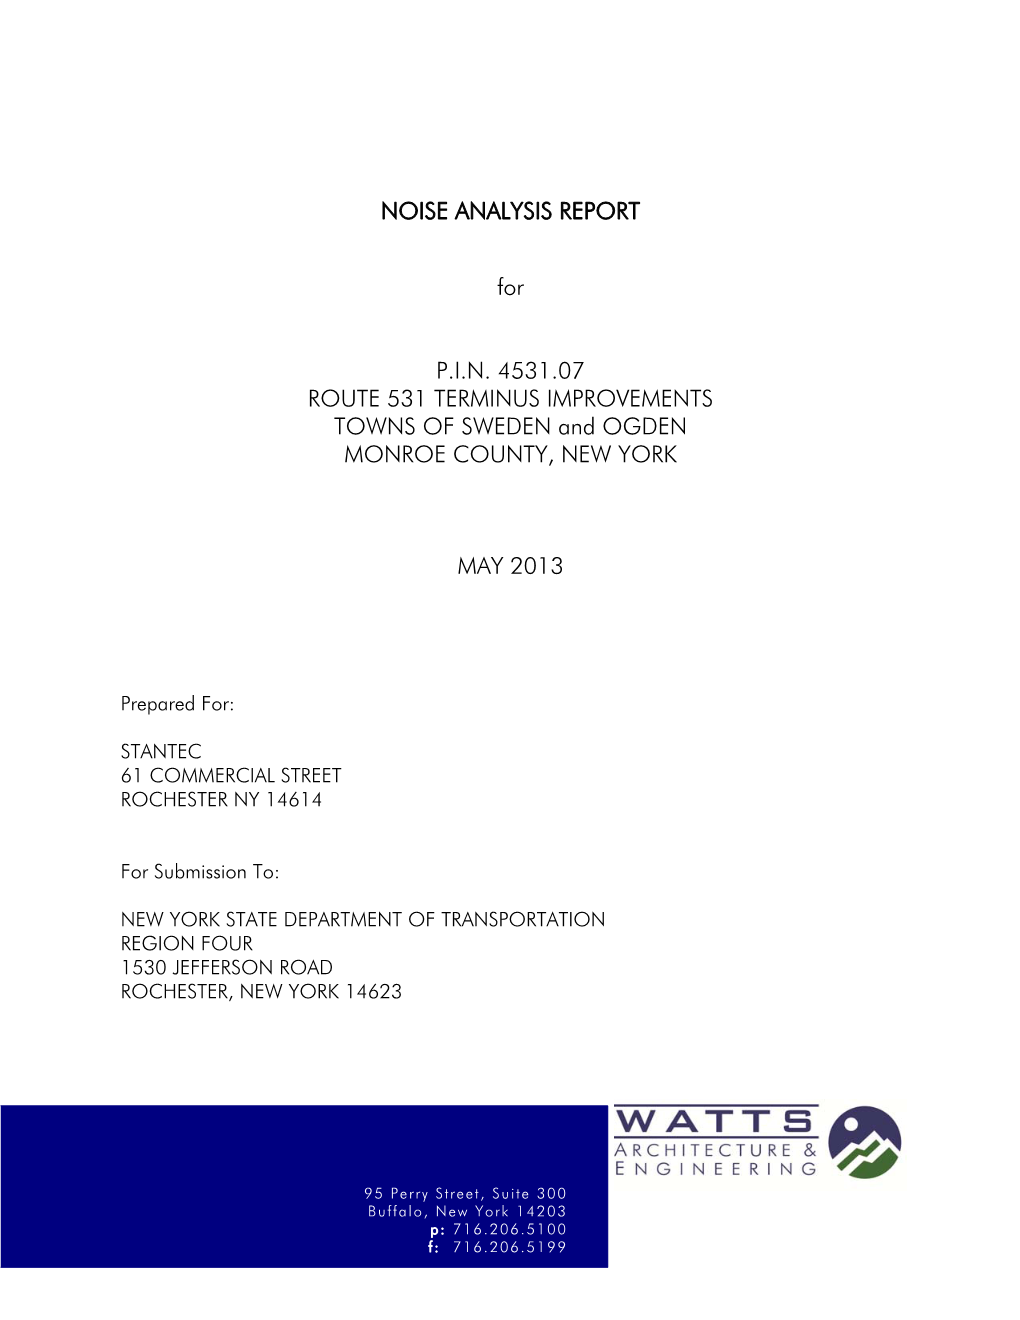 Noise Analysis Report